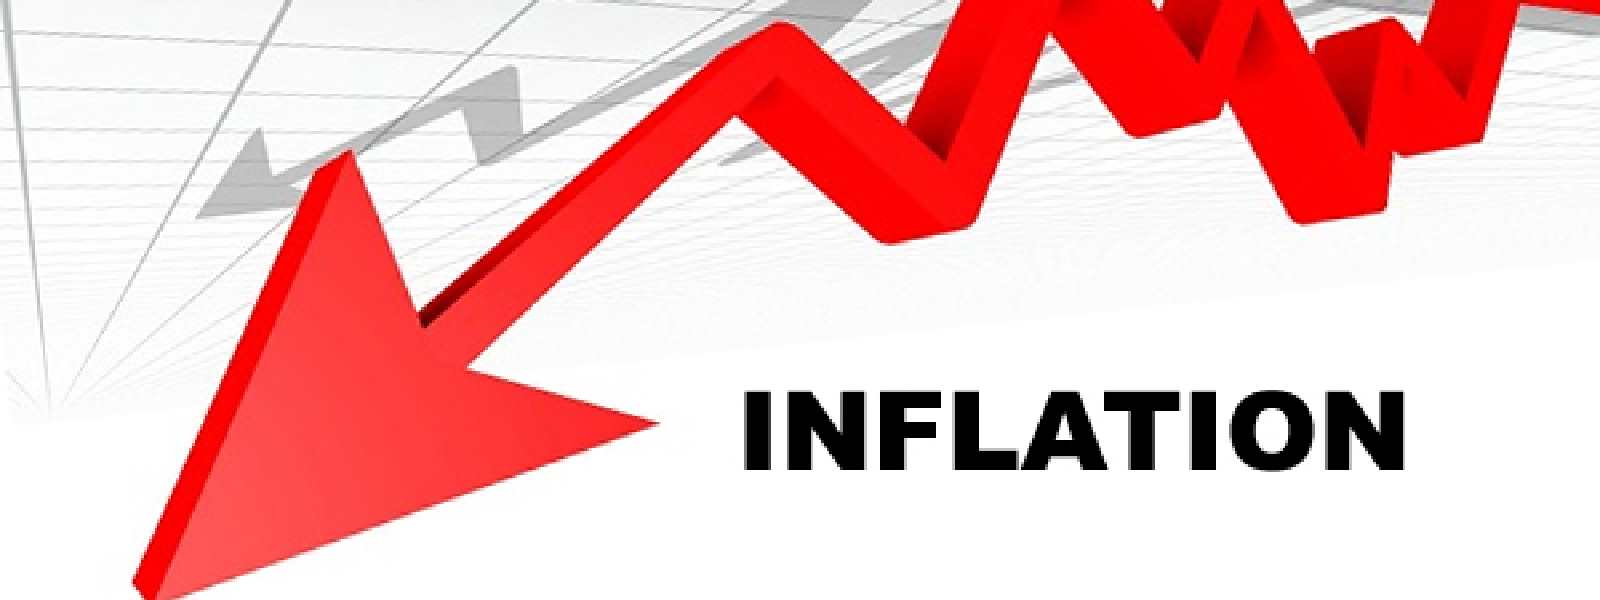 Sri Lanka inflation in August dropped to 2.1%